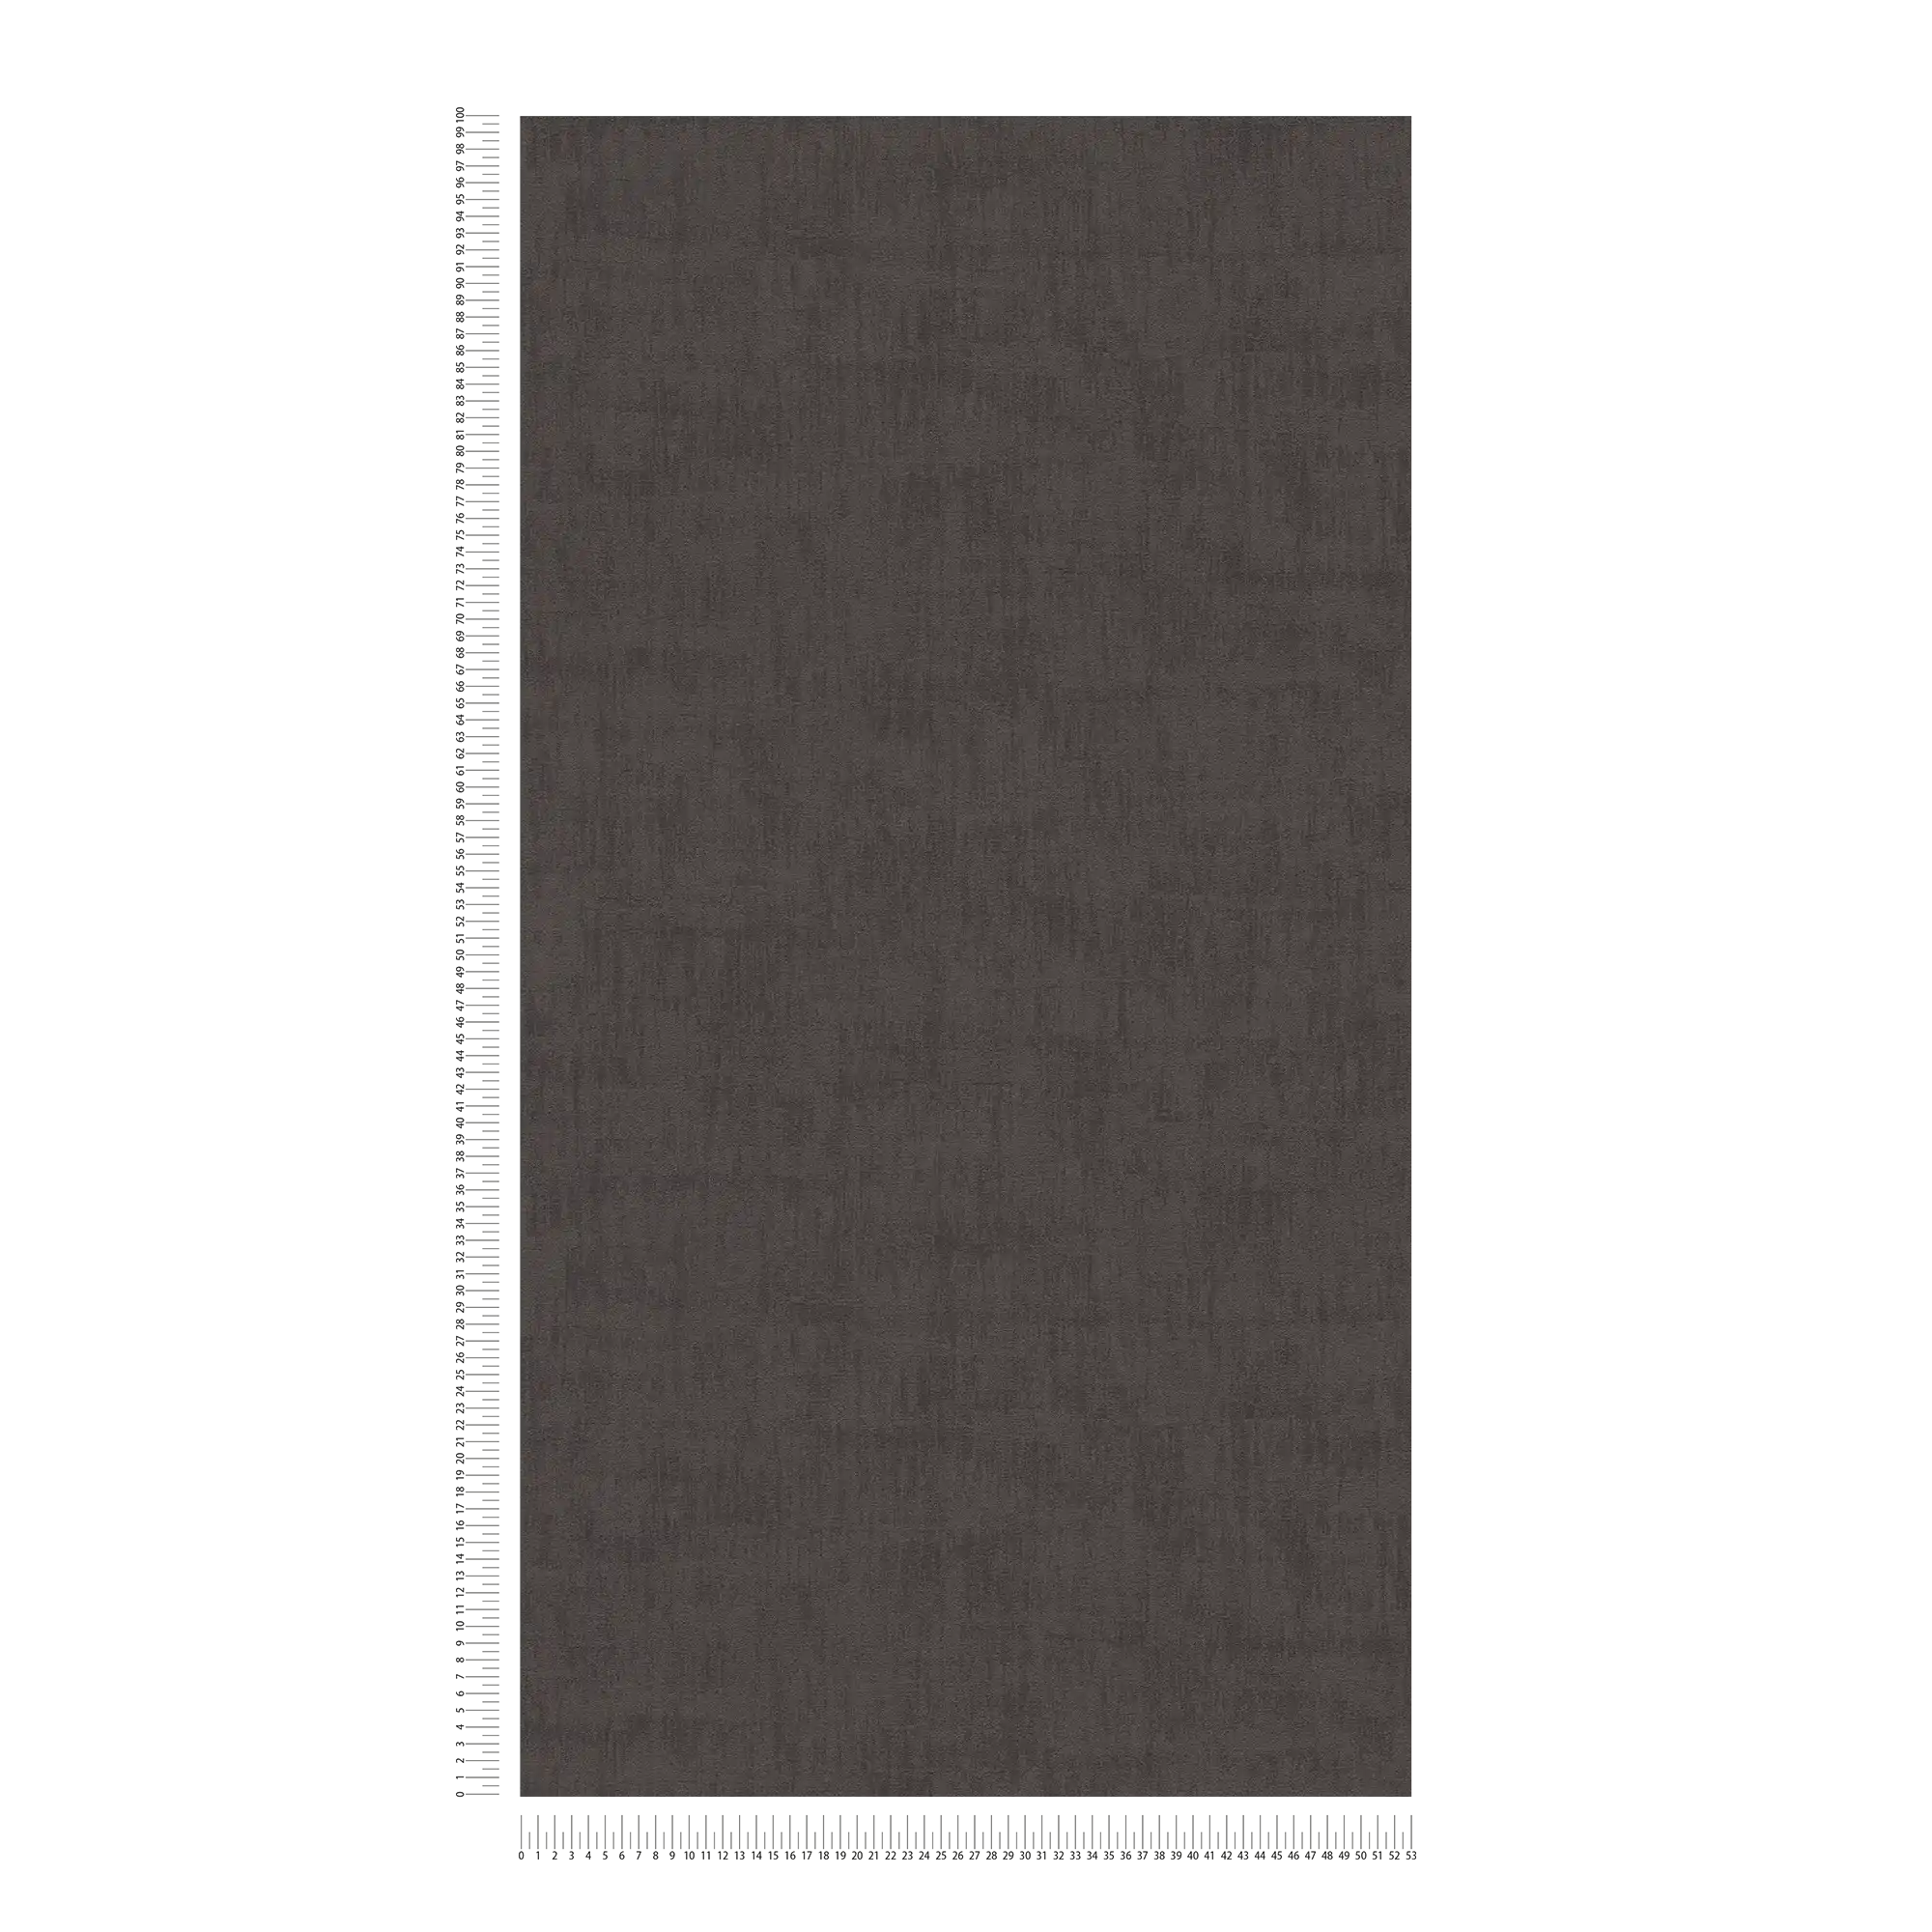             Used look wallpaper with abstract raffia pattern - black
        